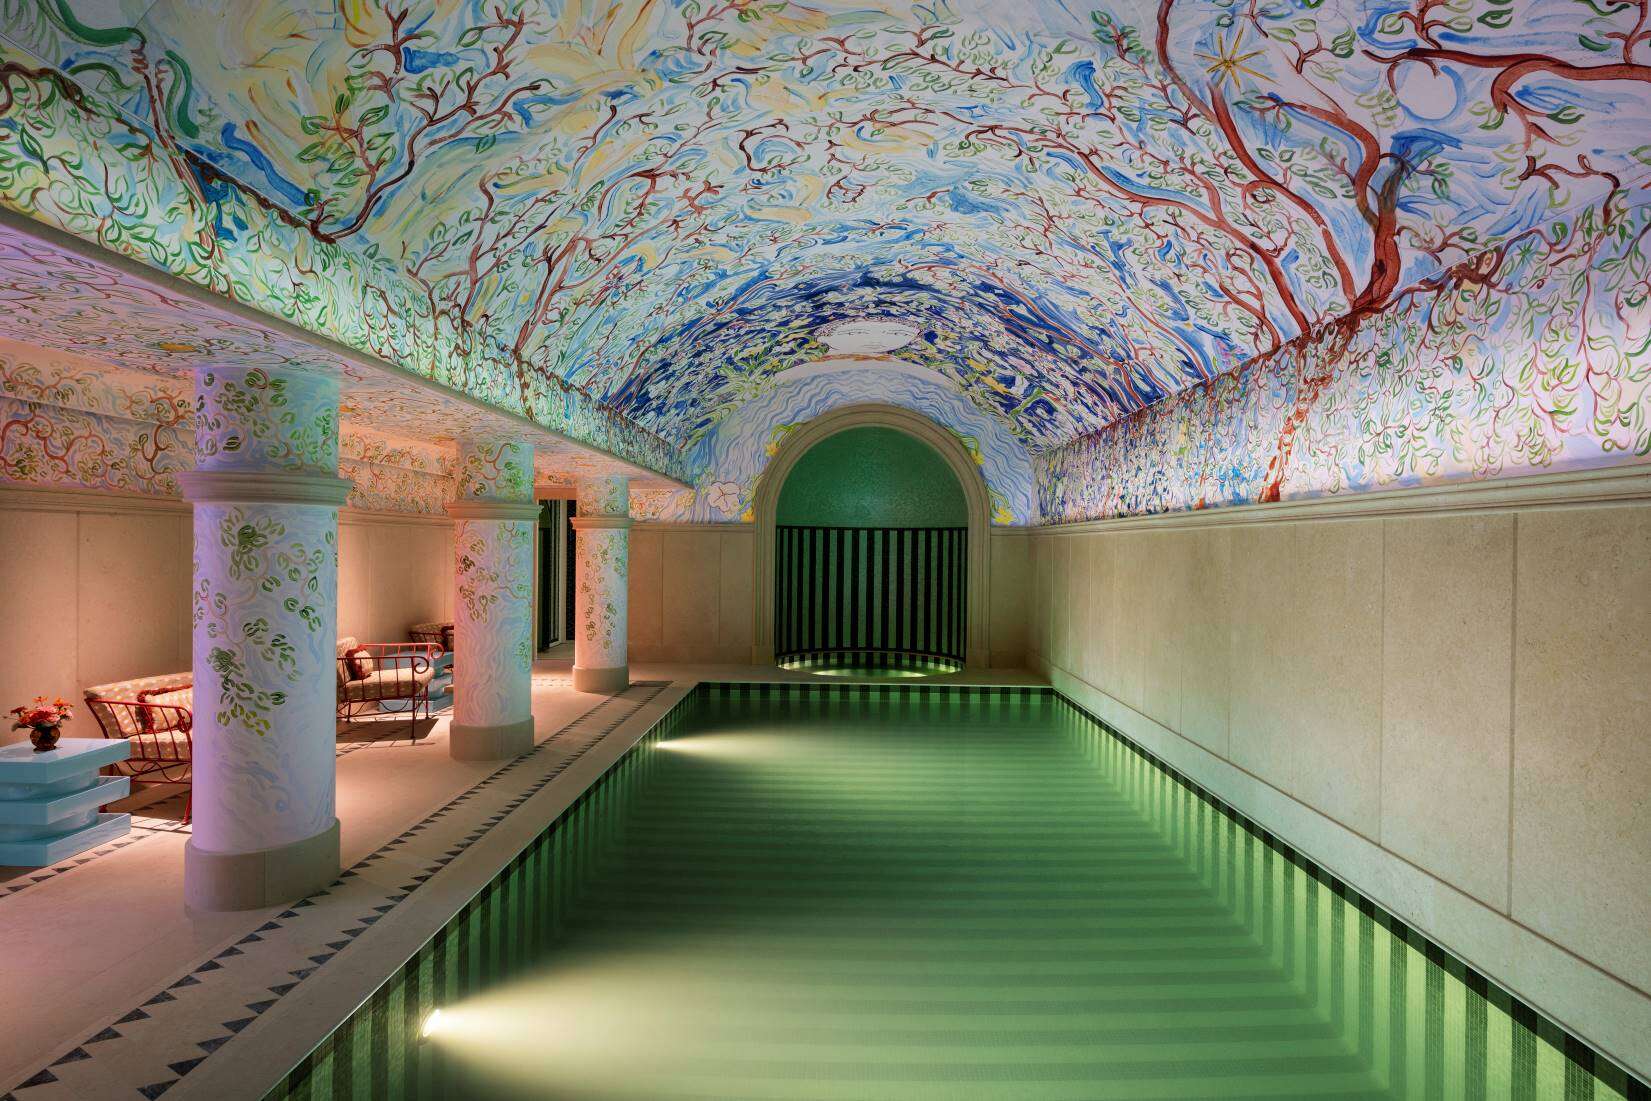 Image showing Le Grand Mazarin's striped underground pool, rare for hotels in Paris, specifically in the Marais